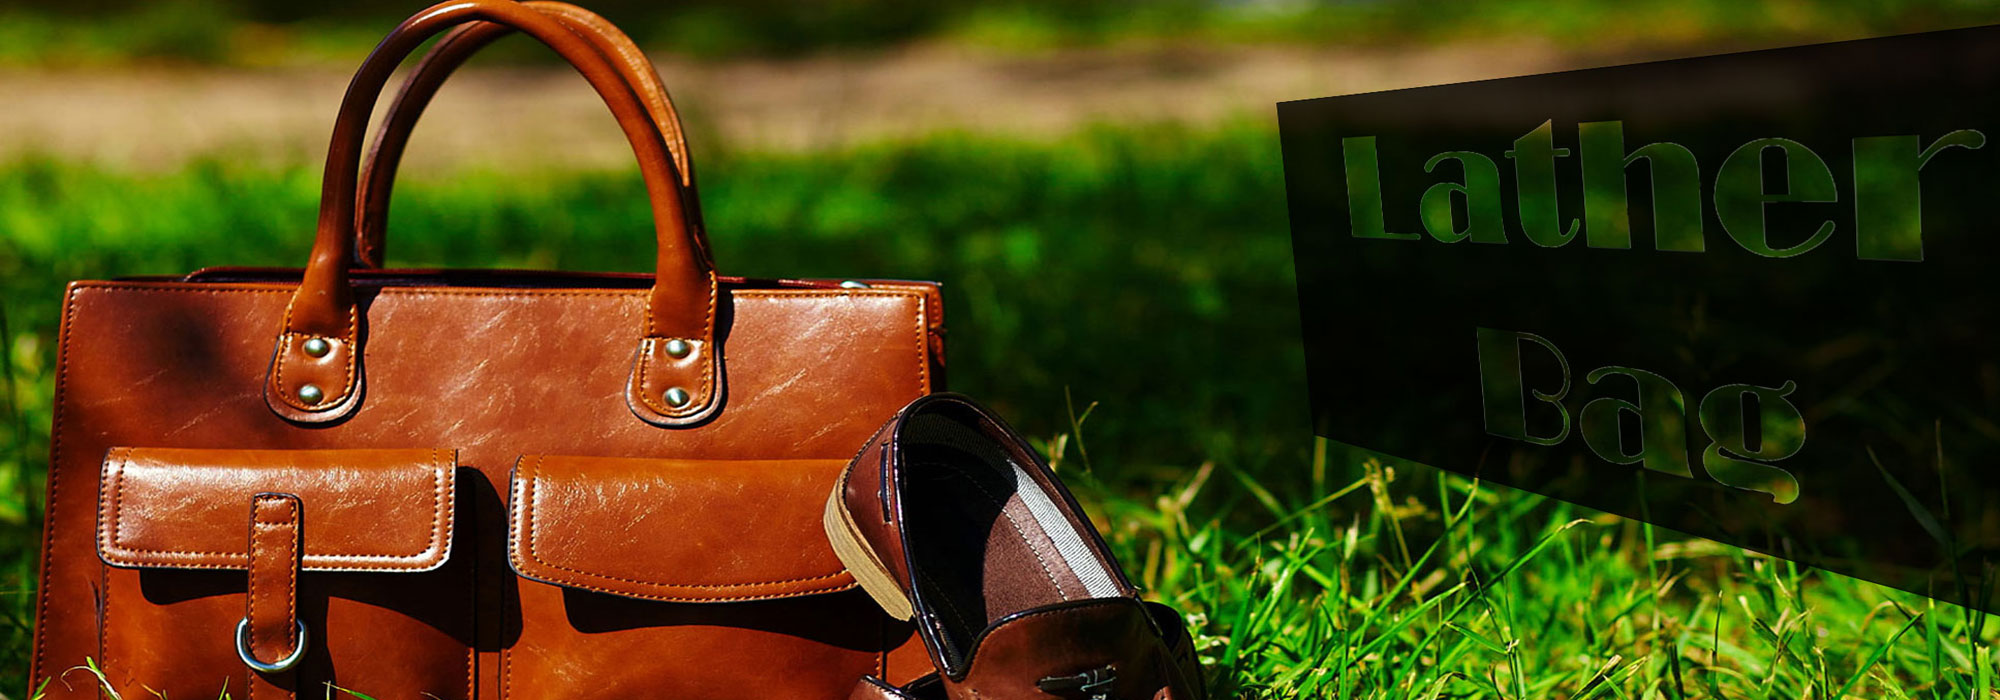 retro-brown-shoes-man-leather-bag-bright-colorful-summer-grass-park